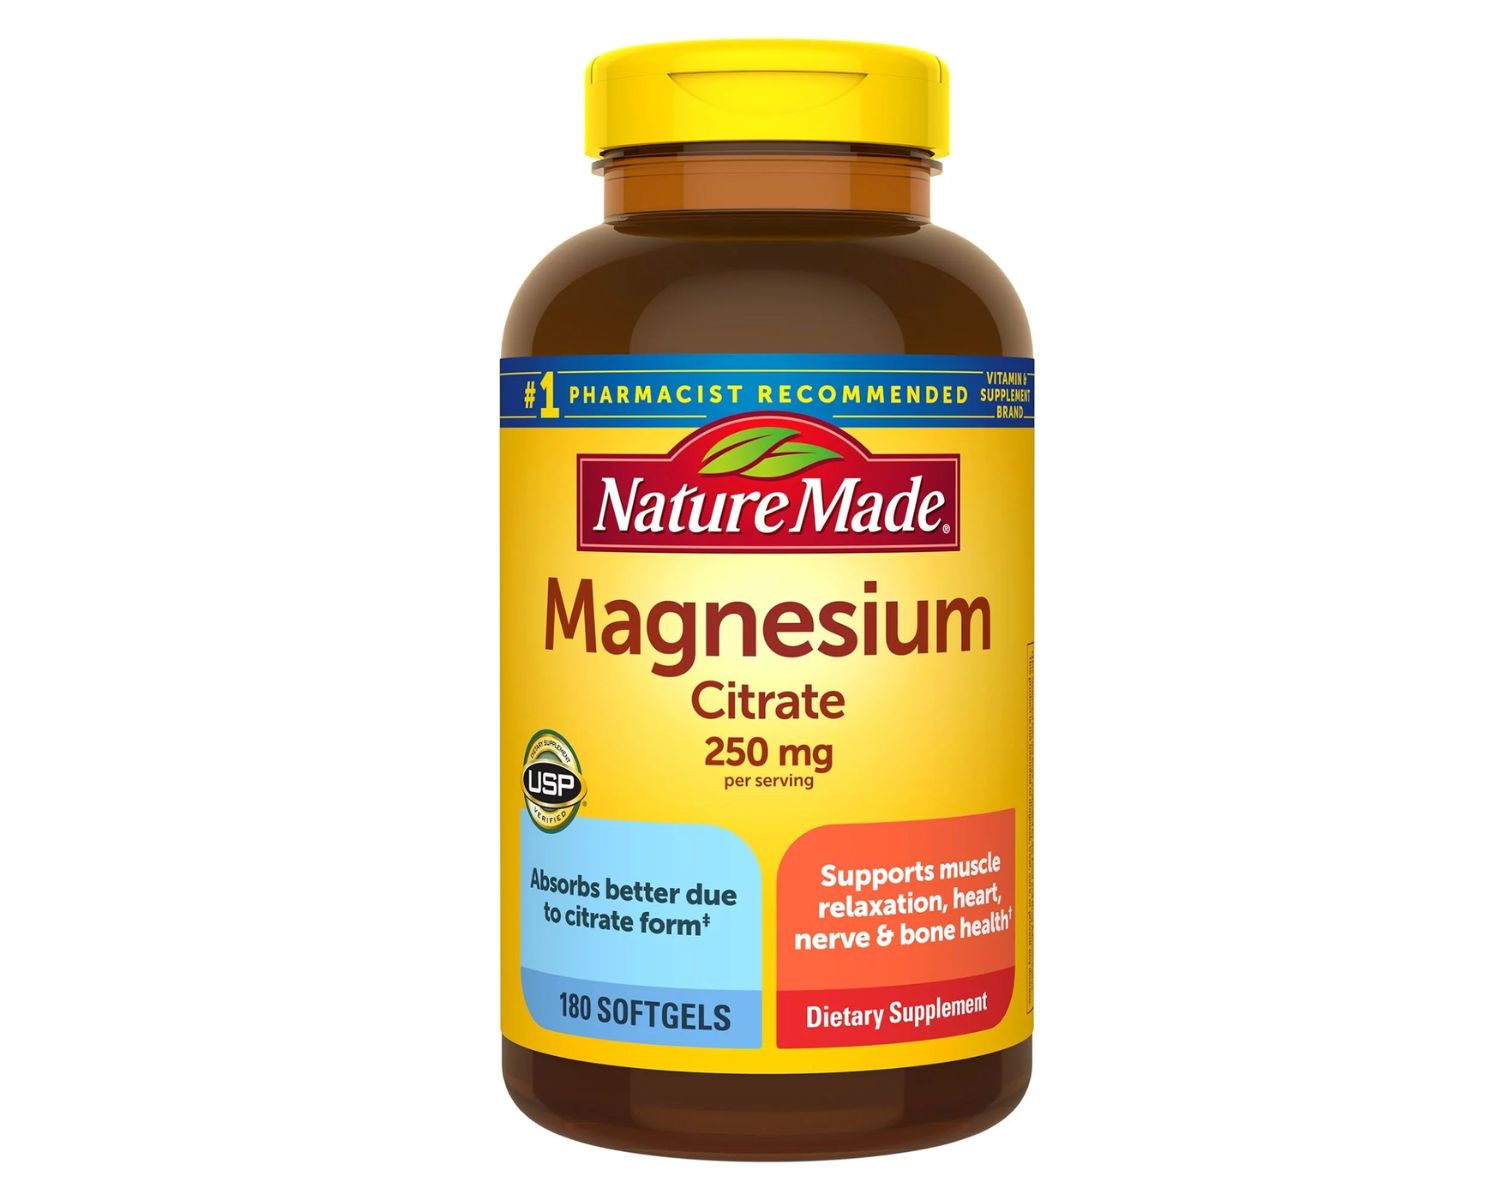 10-magnesium-citrate-nutrition-facts